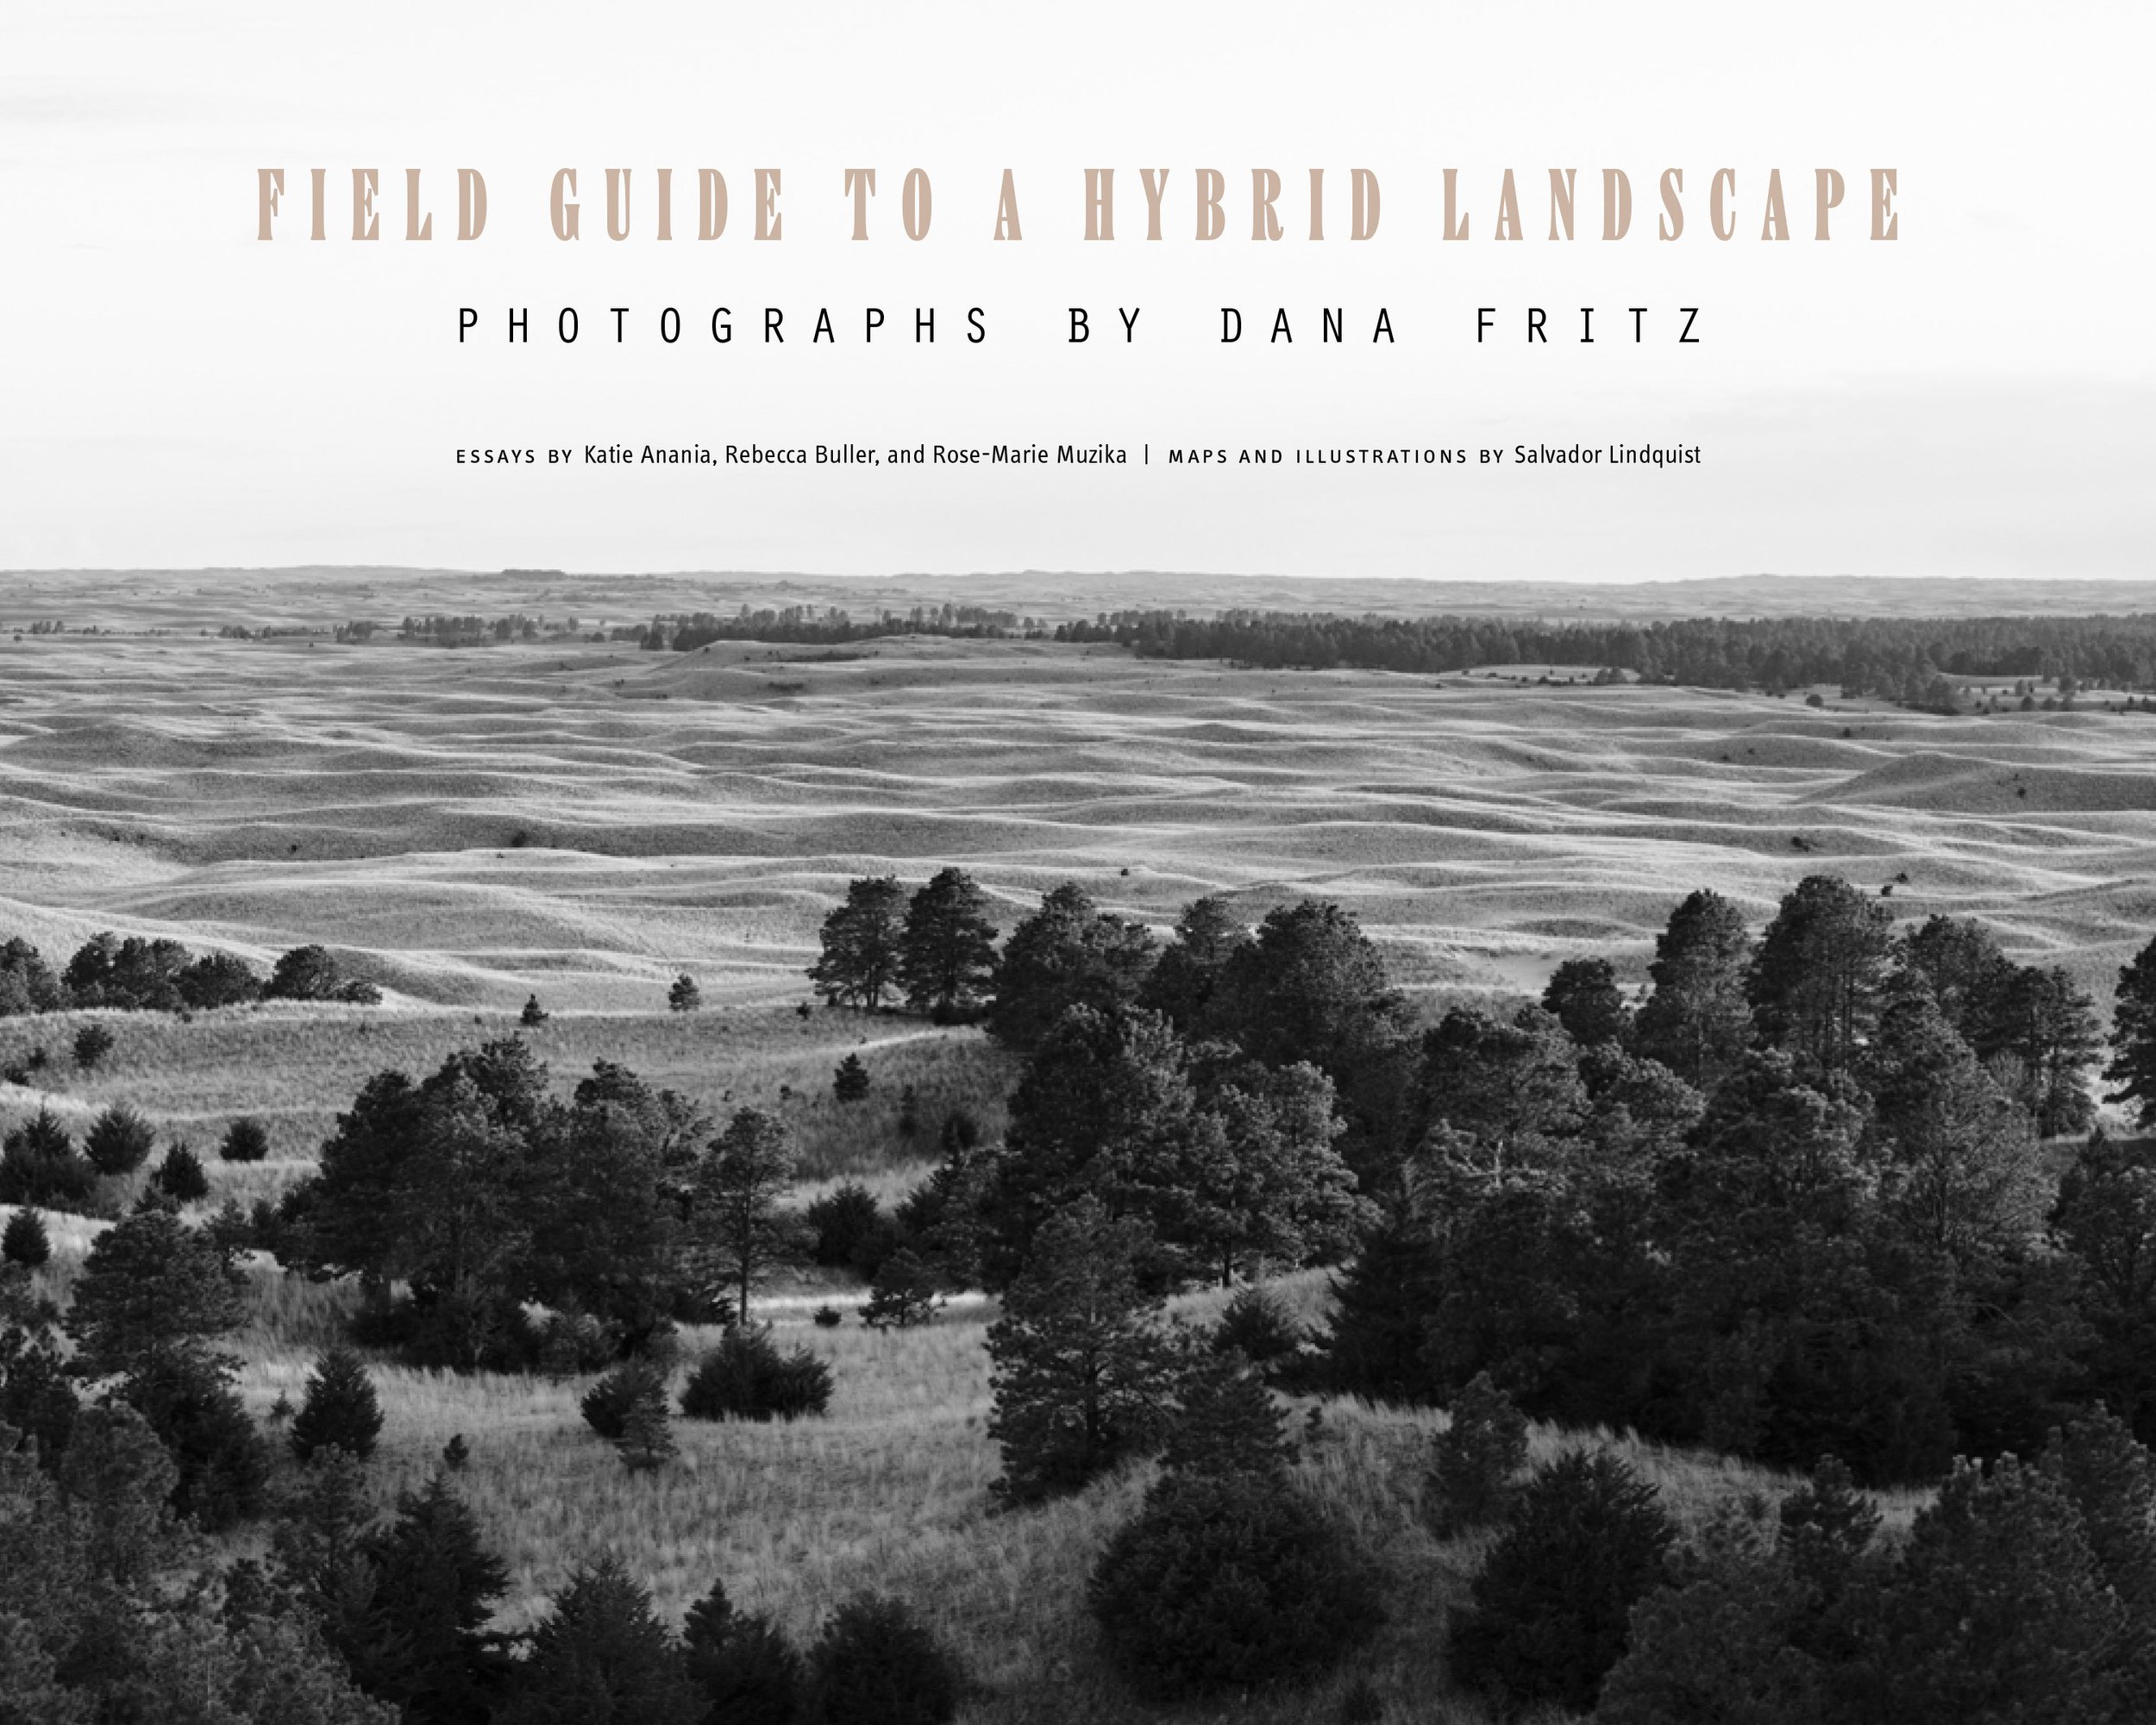 Field Guide to a Hybrid Landscape monograph